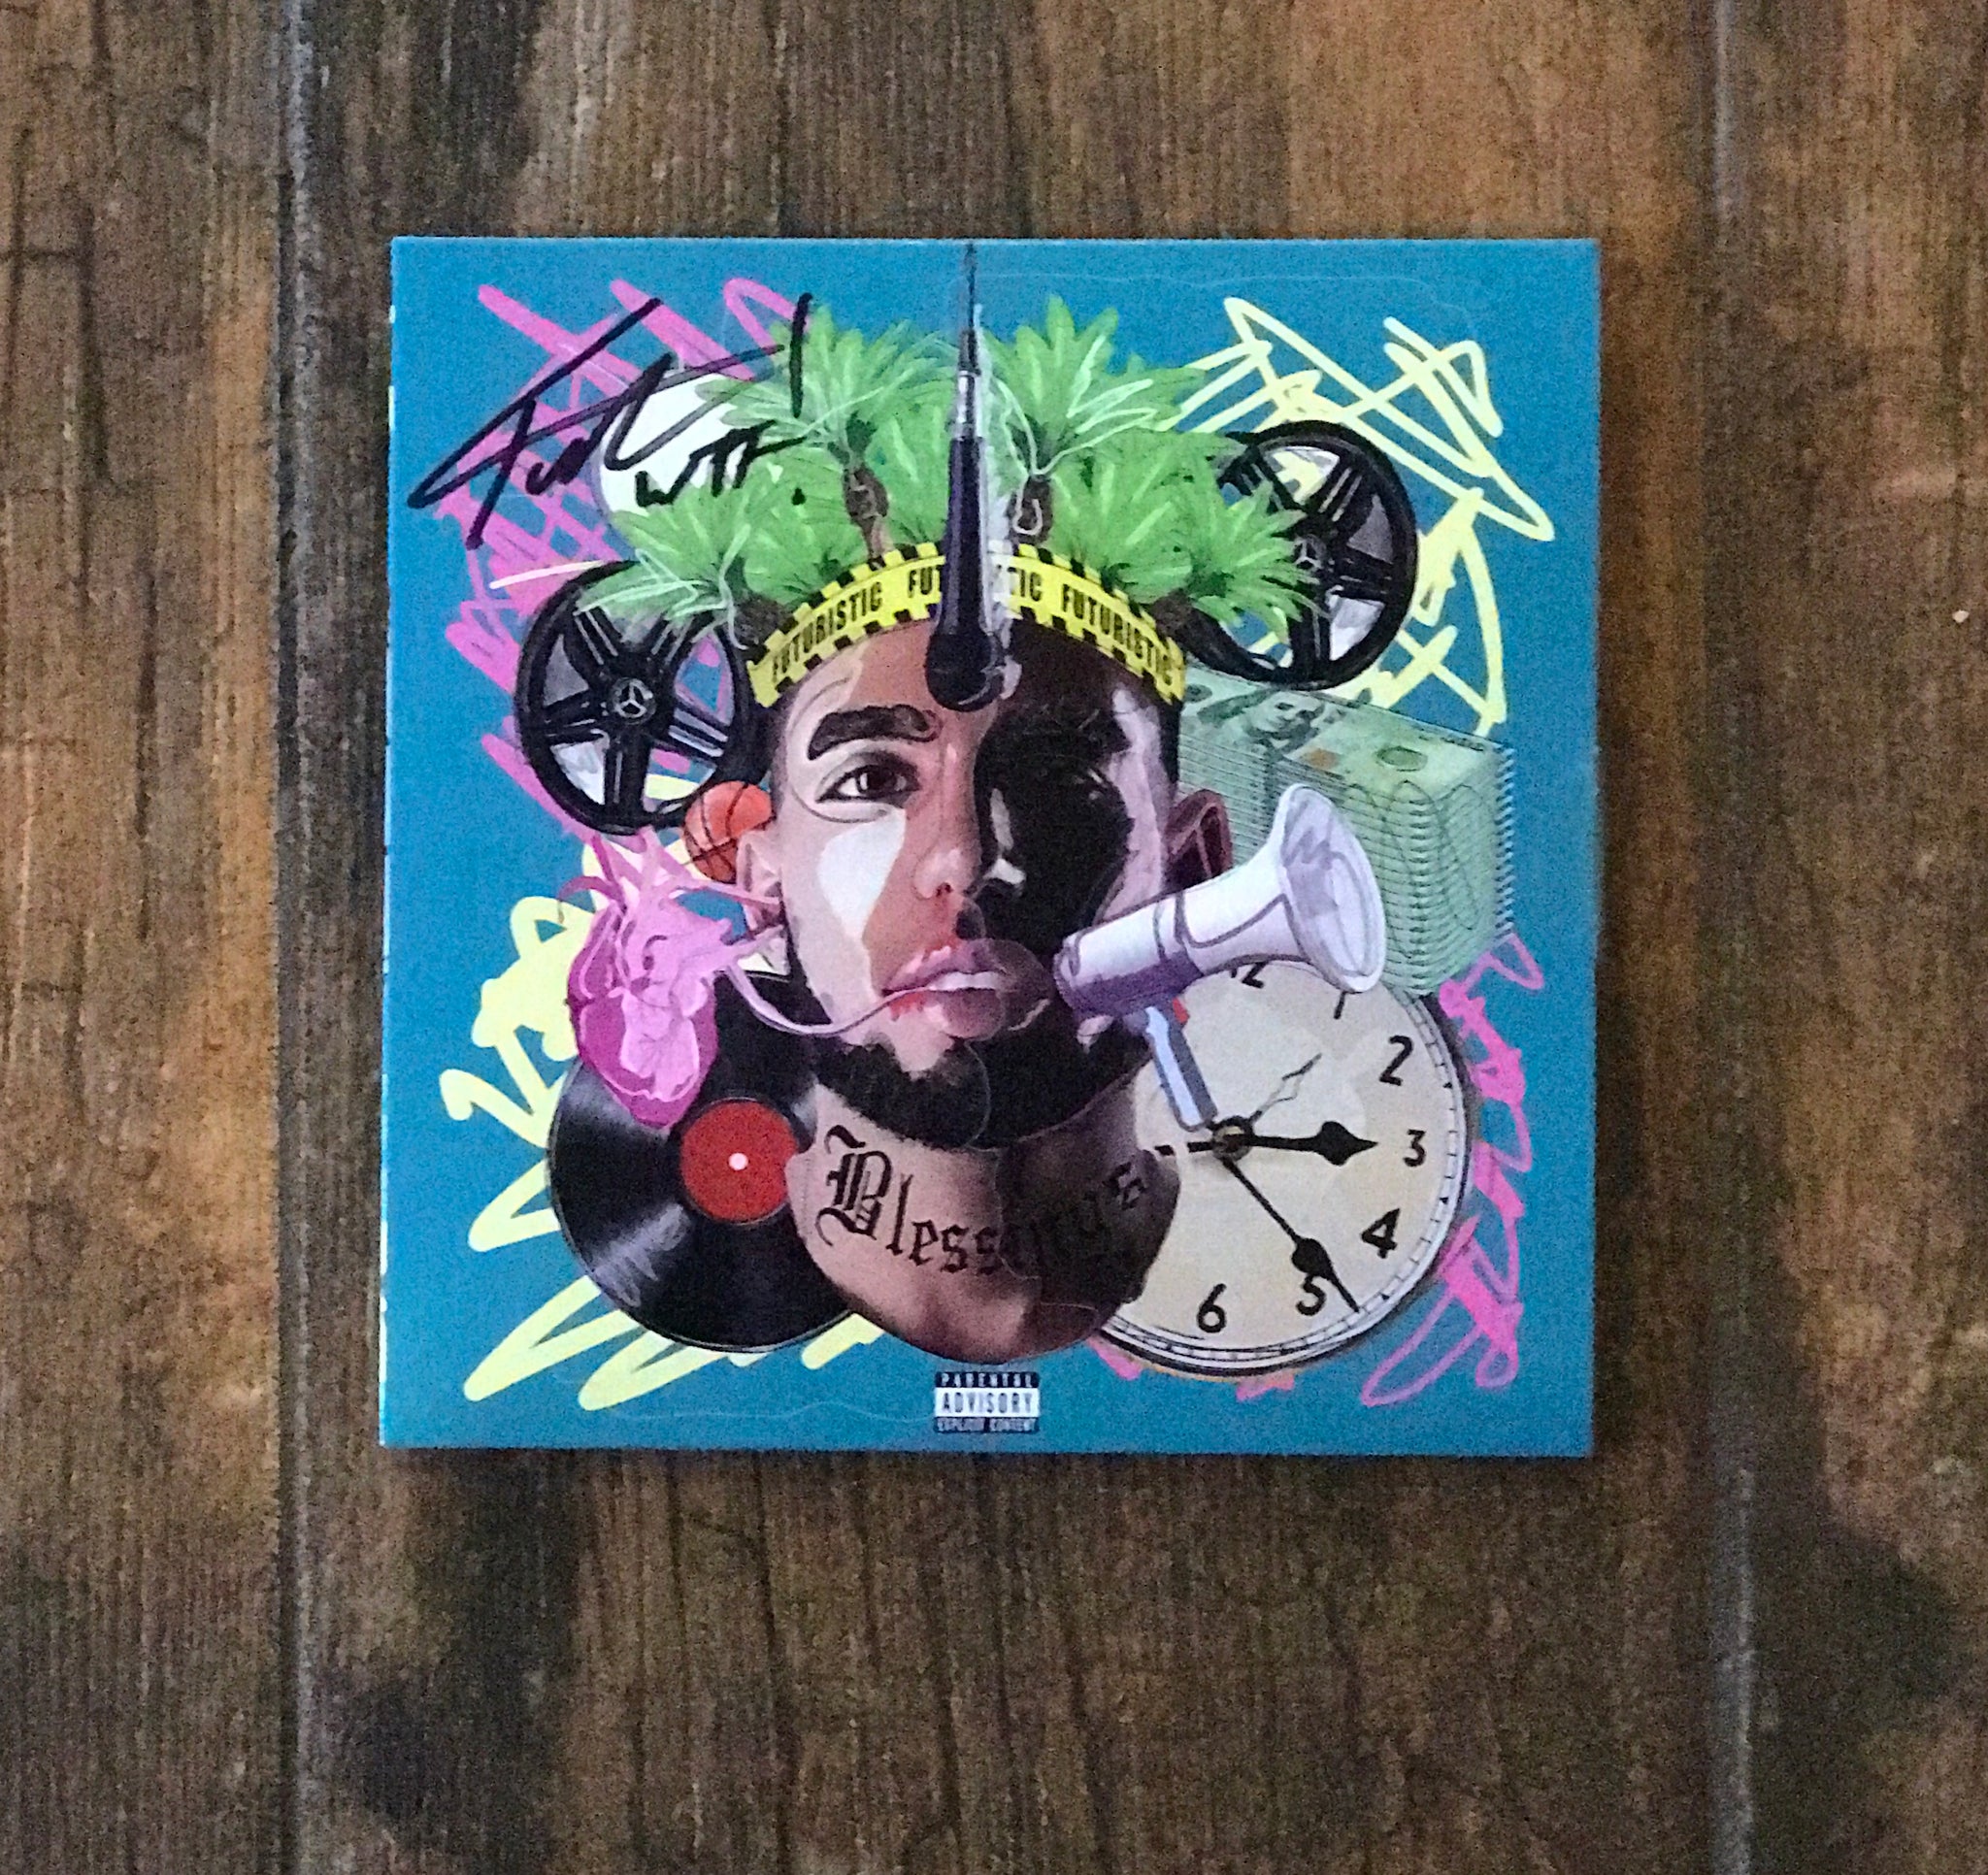 "Blessings" Autographed CD